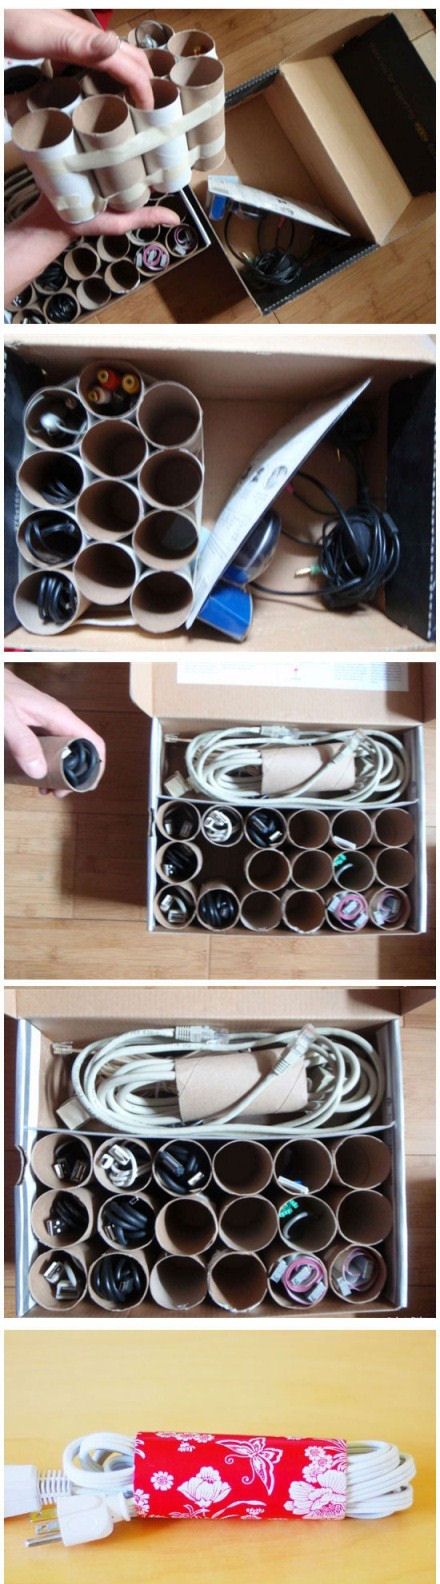 Use Toilet Paper Rolls to Organize Cords and Electronics. 